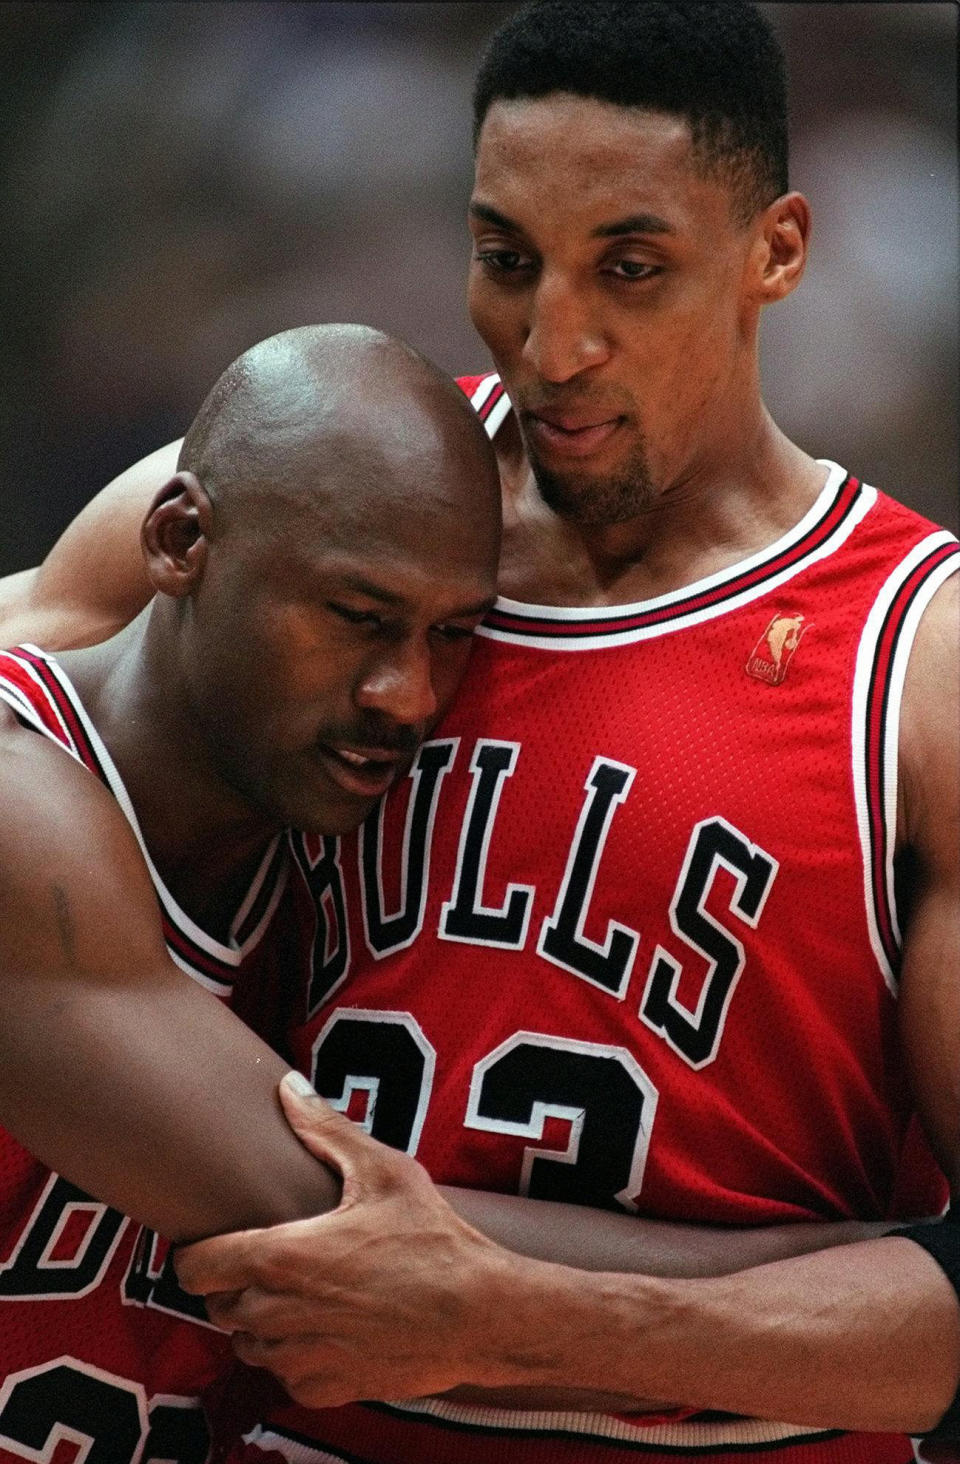 FILE - In this June 11, 1997 file photo, Chicago Bulls Scottie Pippen, right, embraces an exhausted Michael Jordan following their win in Game 5 of the NBA Finals against the Utah Jazz, in Salt Lake City. The flu-like illness Jordan fought through to lead the Bulls to a crucial victory in the 1997 NBA Finals created instant fodder for the virtue of perseverance. Pushing past boundaries, overcoming obstacles and adversity — that is part of the ethos of major competitive sports. That is how elite athletes become wired to win. (AP Photo/Jack Smith, File)